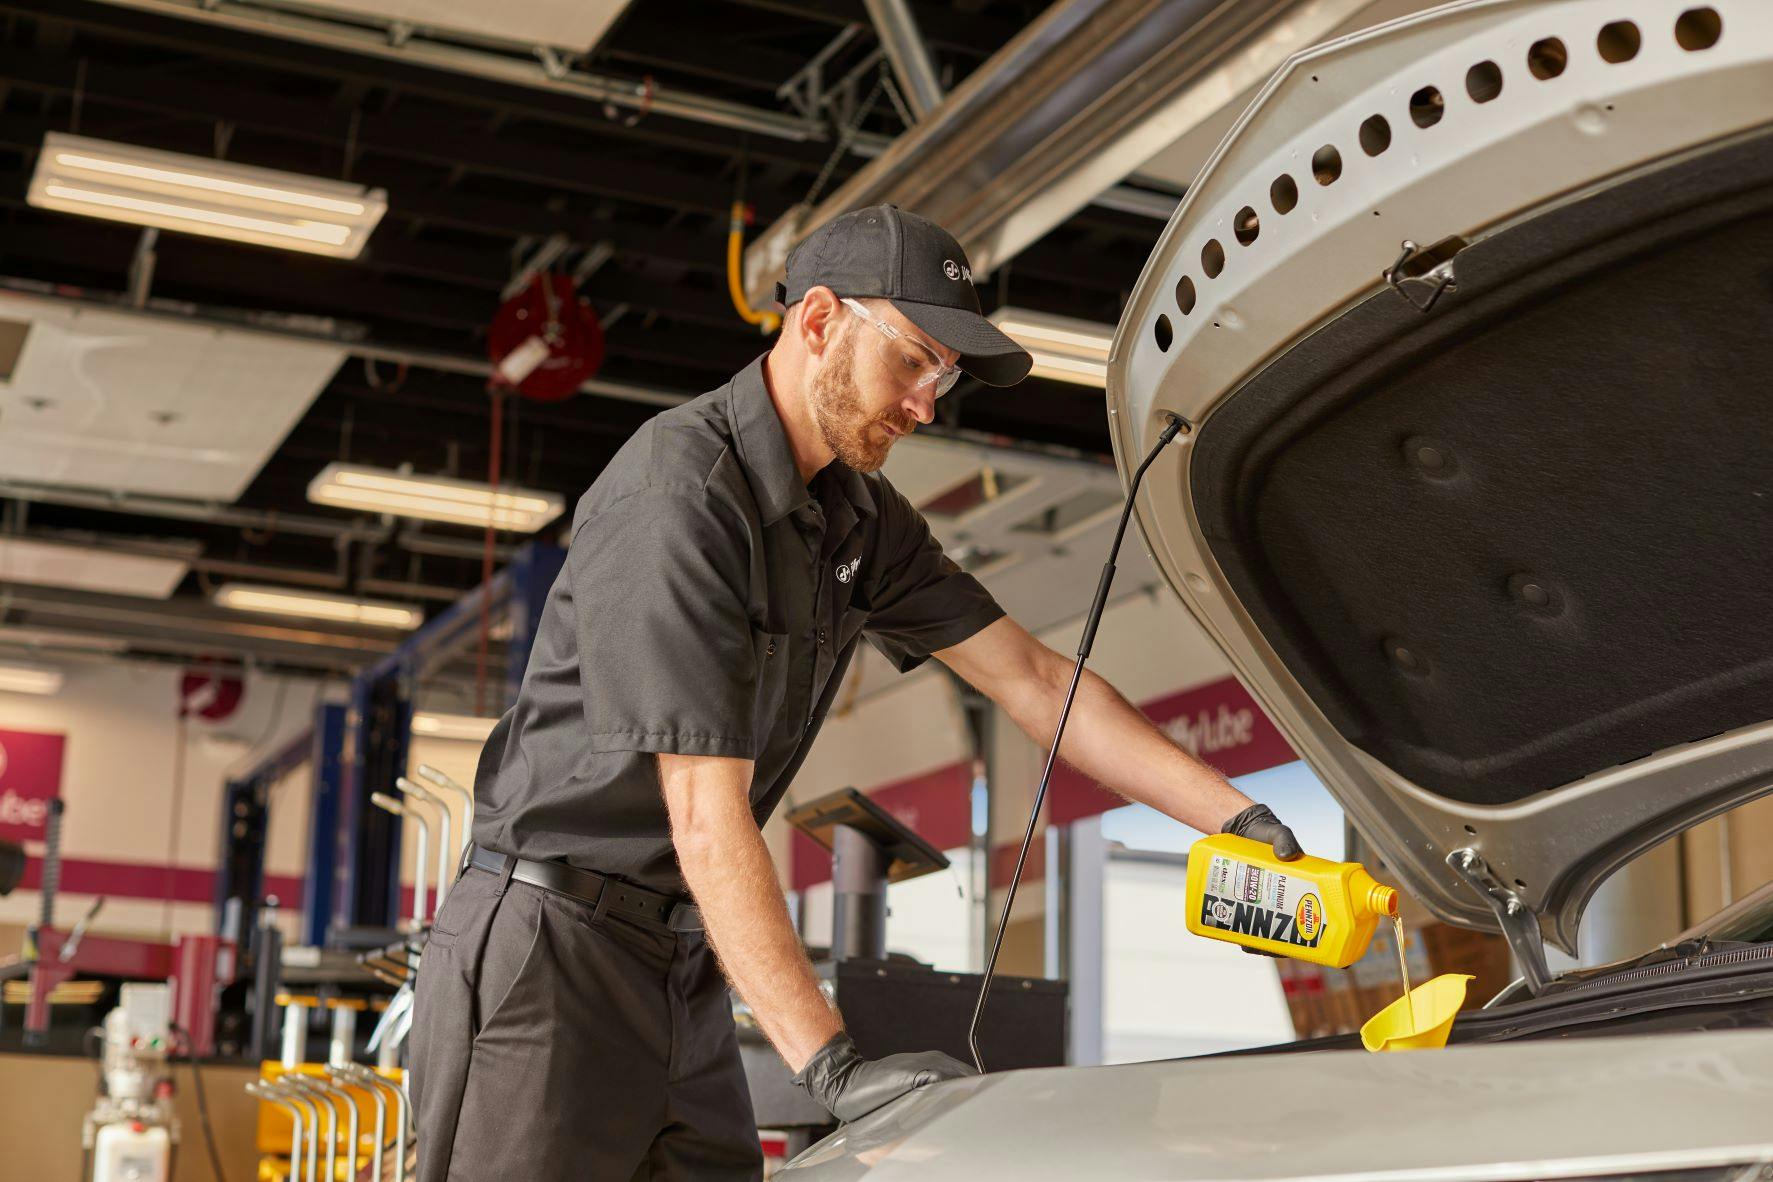 A Jiffy Lube technician changing a vehicle's oil with Pennzoil 